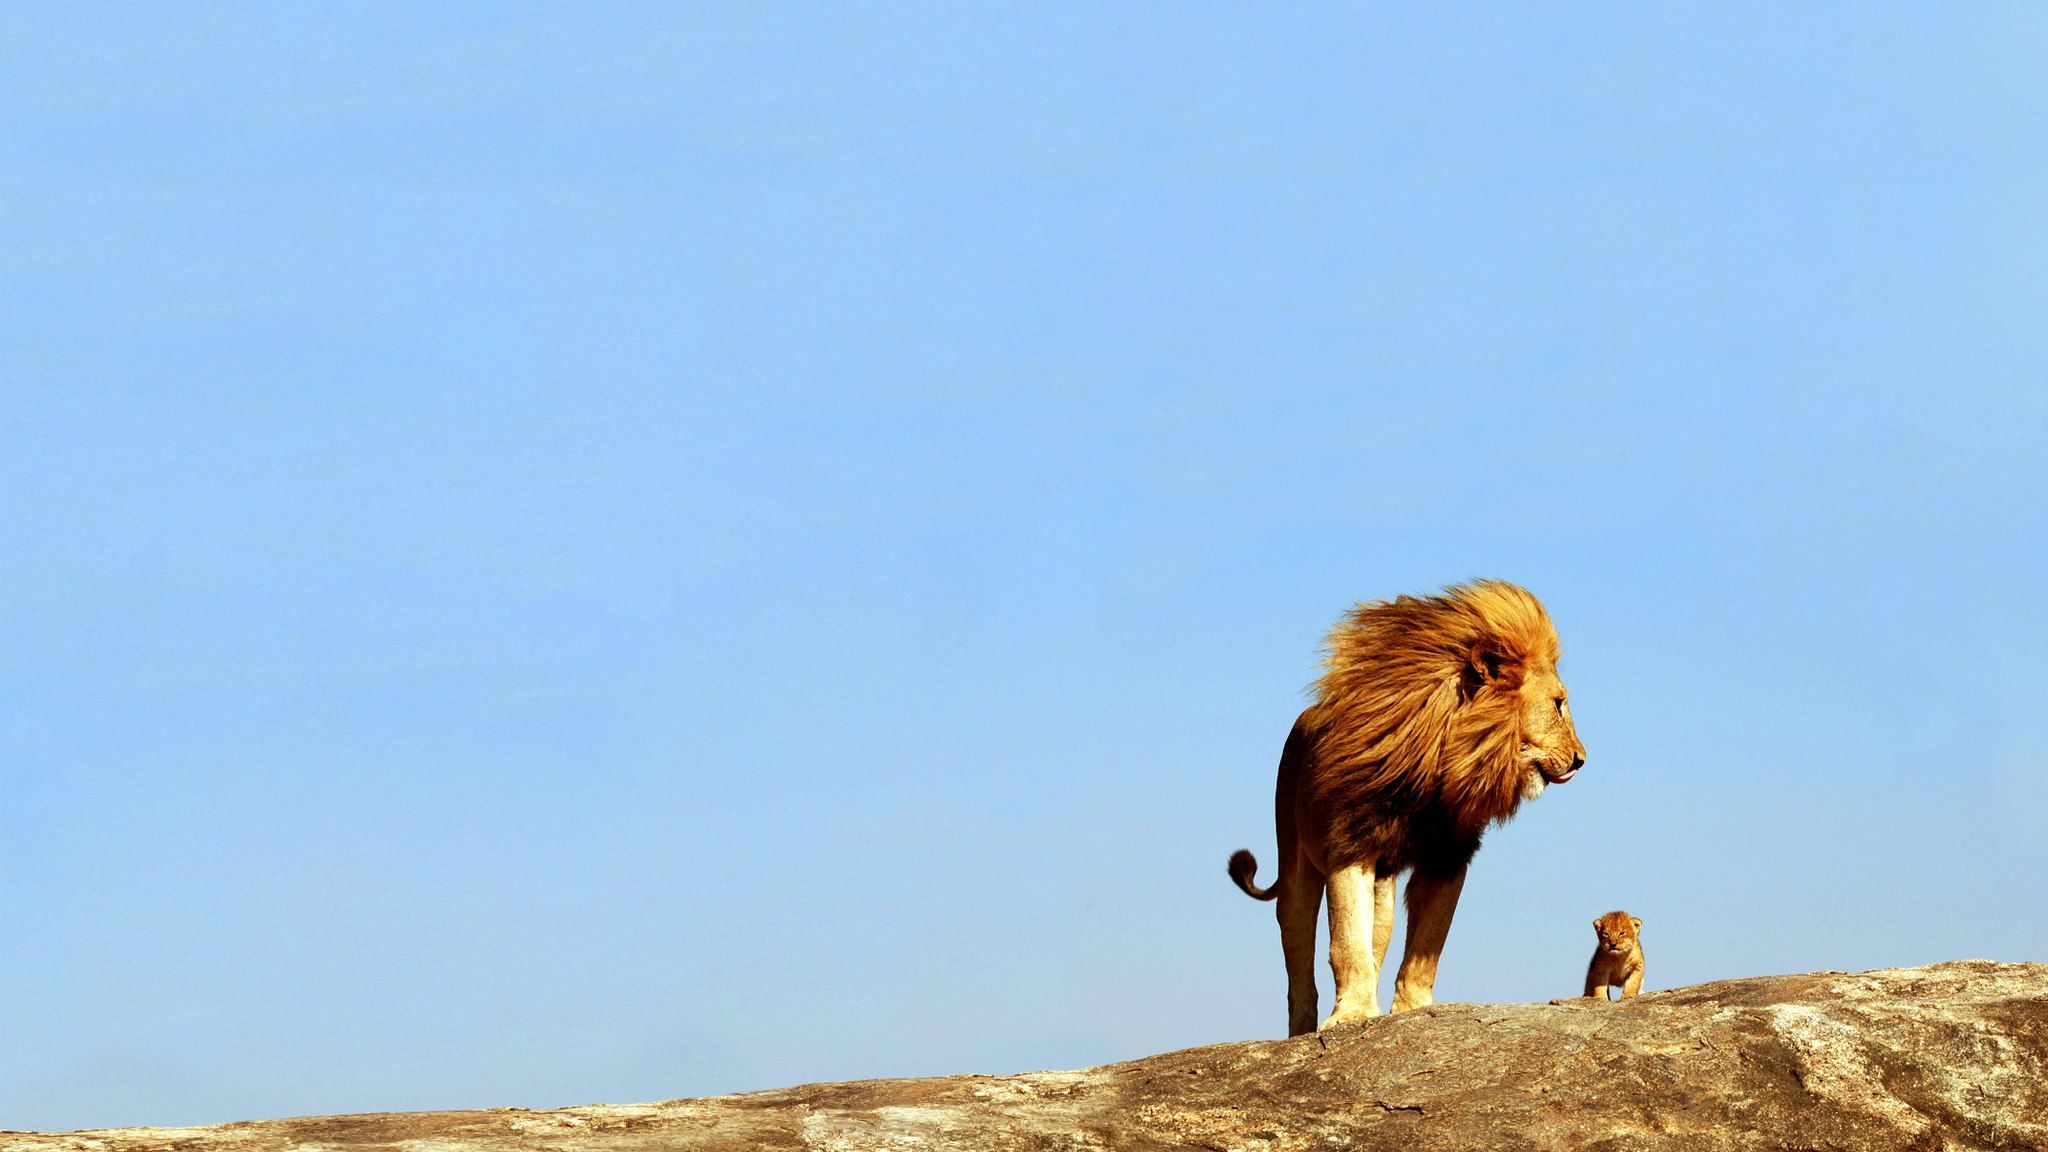 Lion wallpaper 2048x1152 - (#37108) - High Quality and Resolution ...